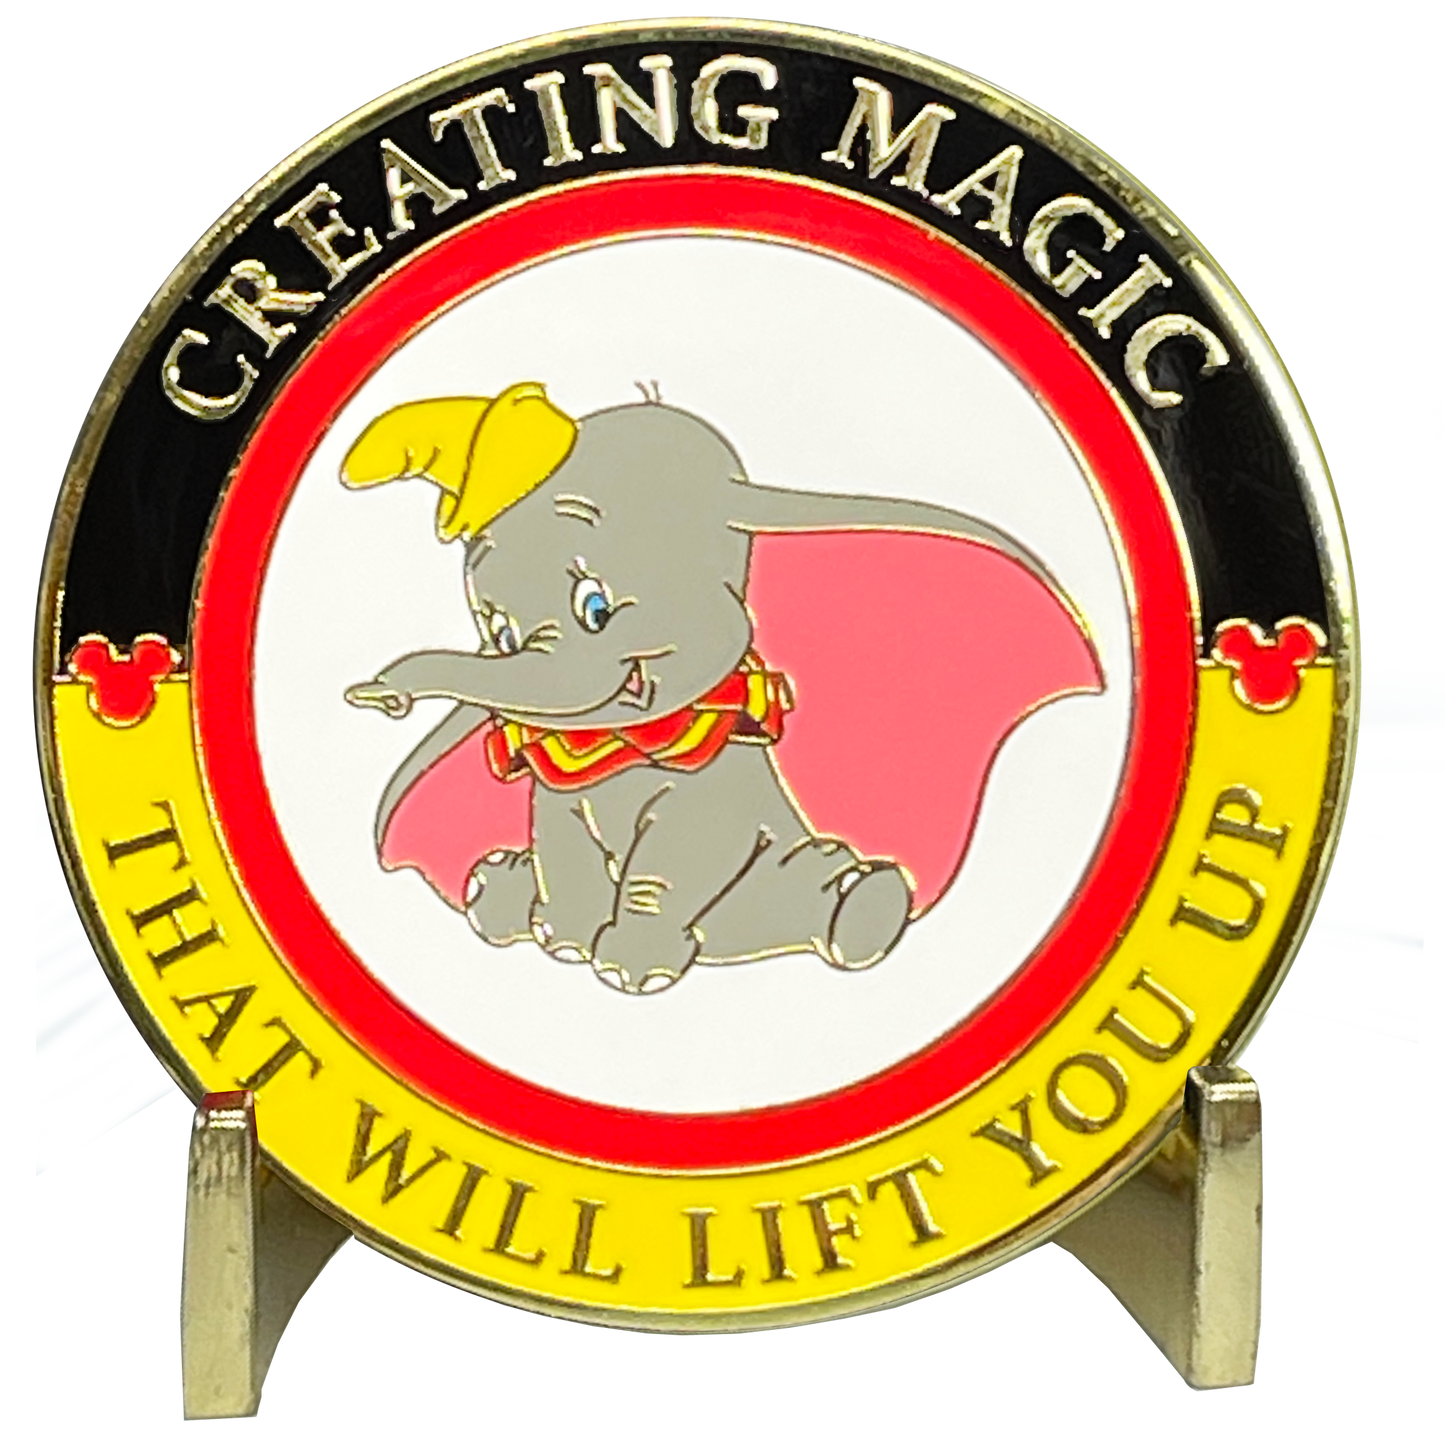 BL9-013 CREATING MAGIC Cast Member Challenge Coin